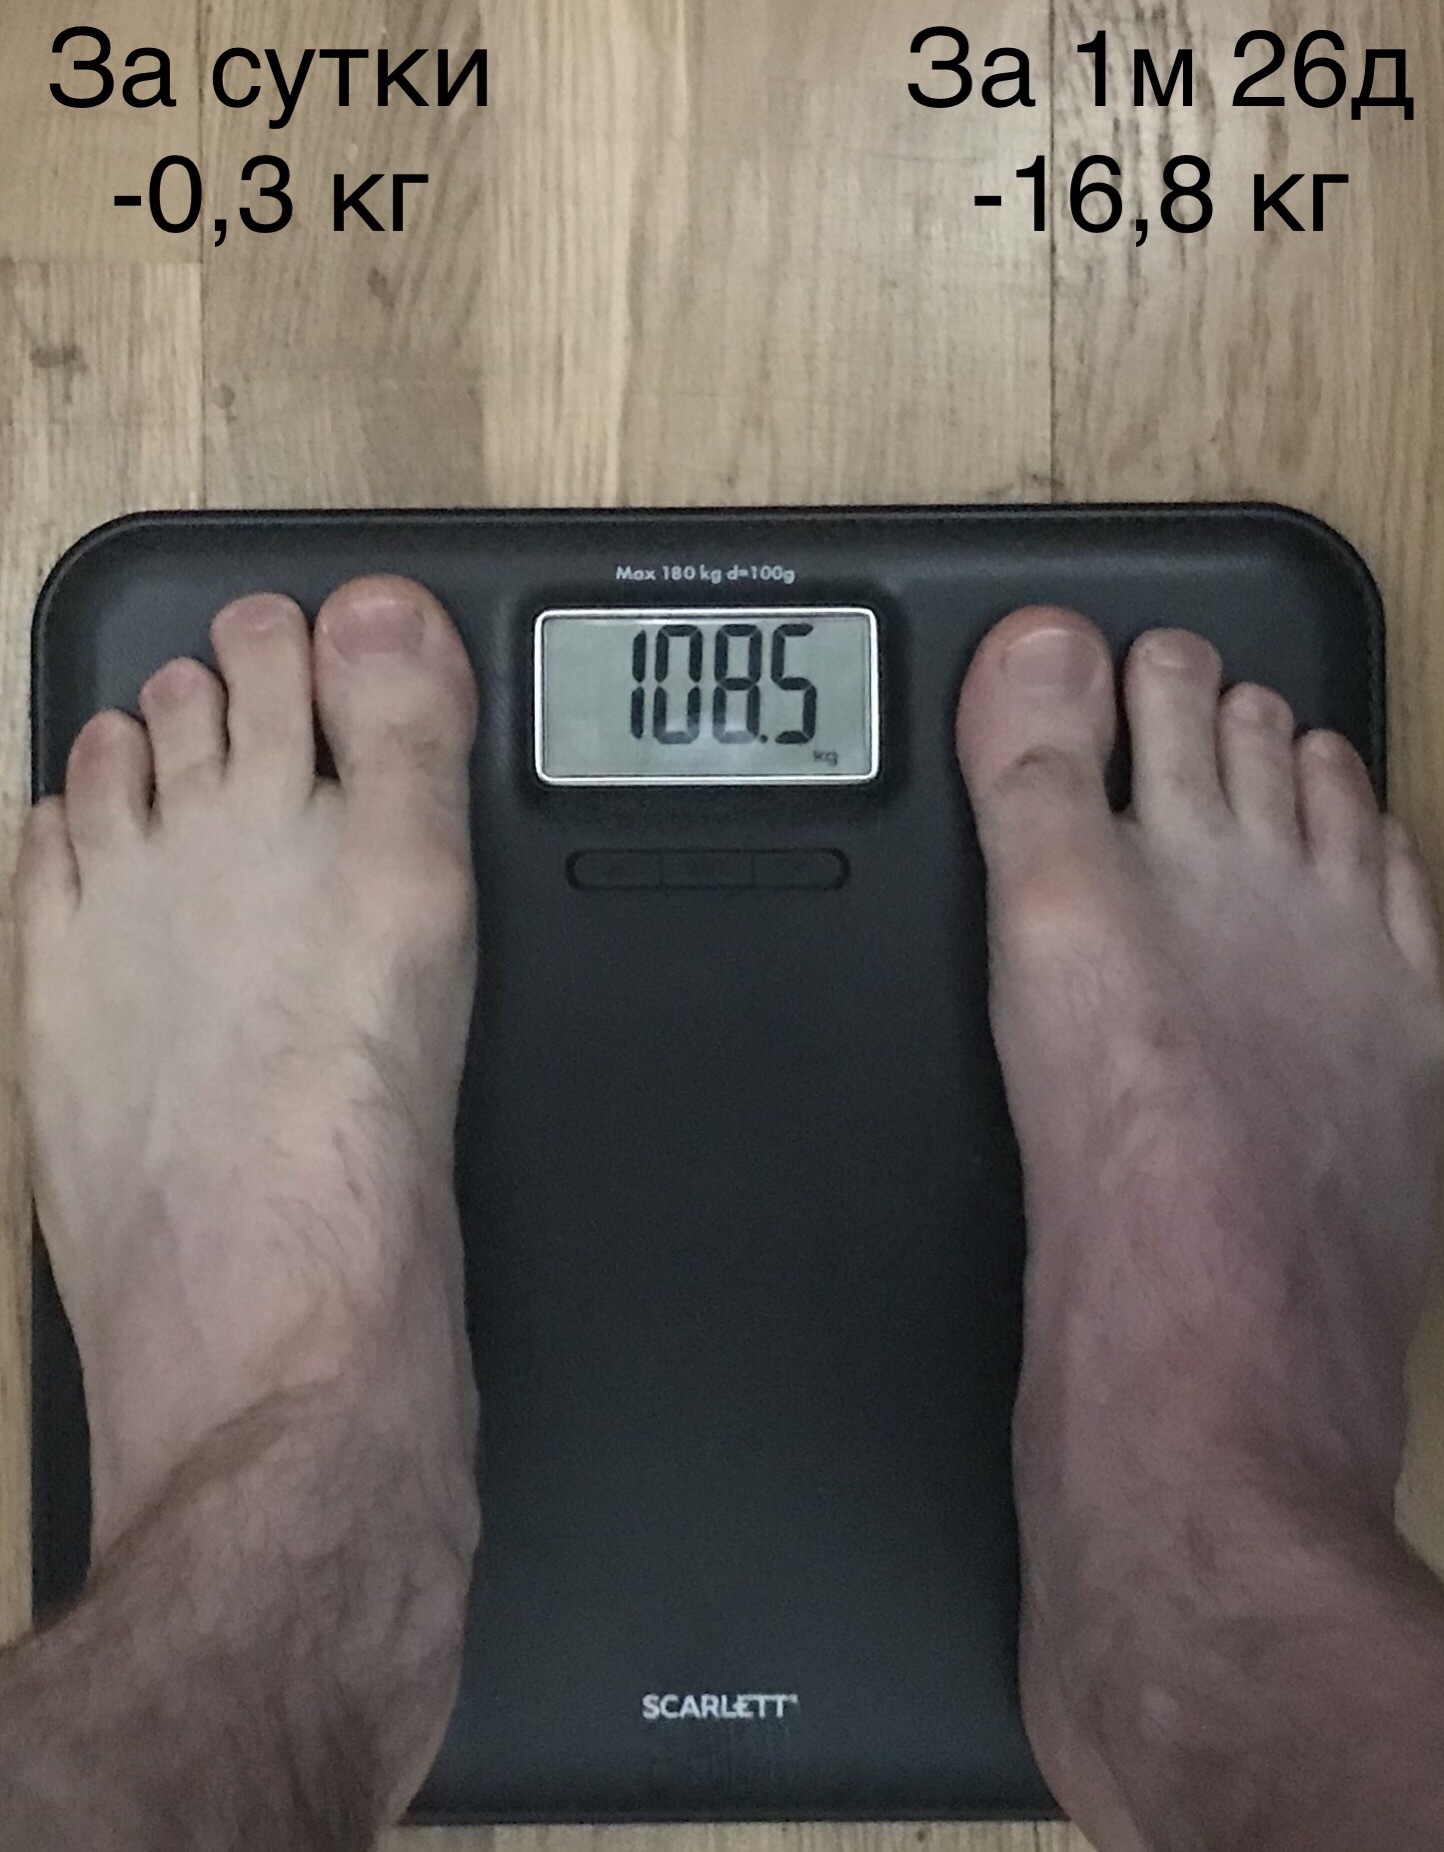 The epic with weight loss, report No. 2 05/25/2018 - Longpost, Slimming, Actionblog, My